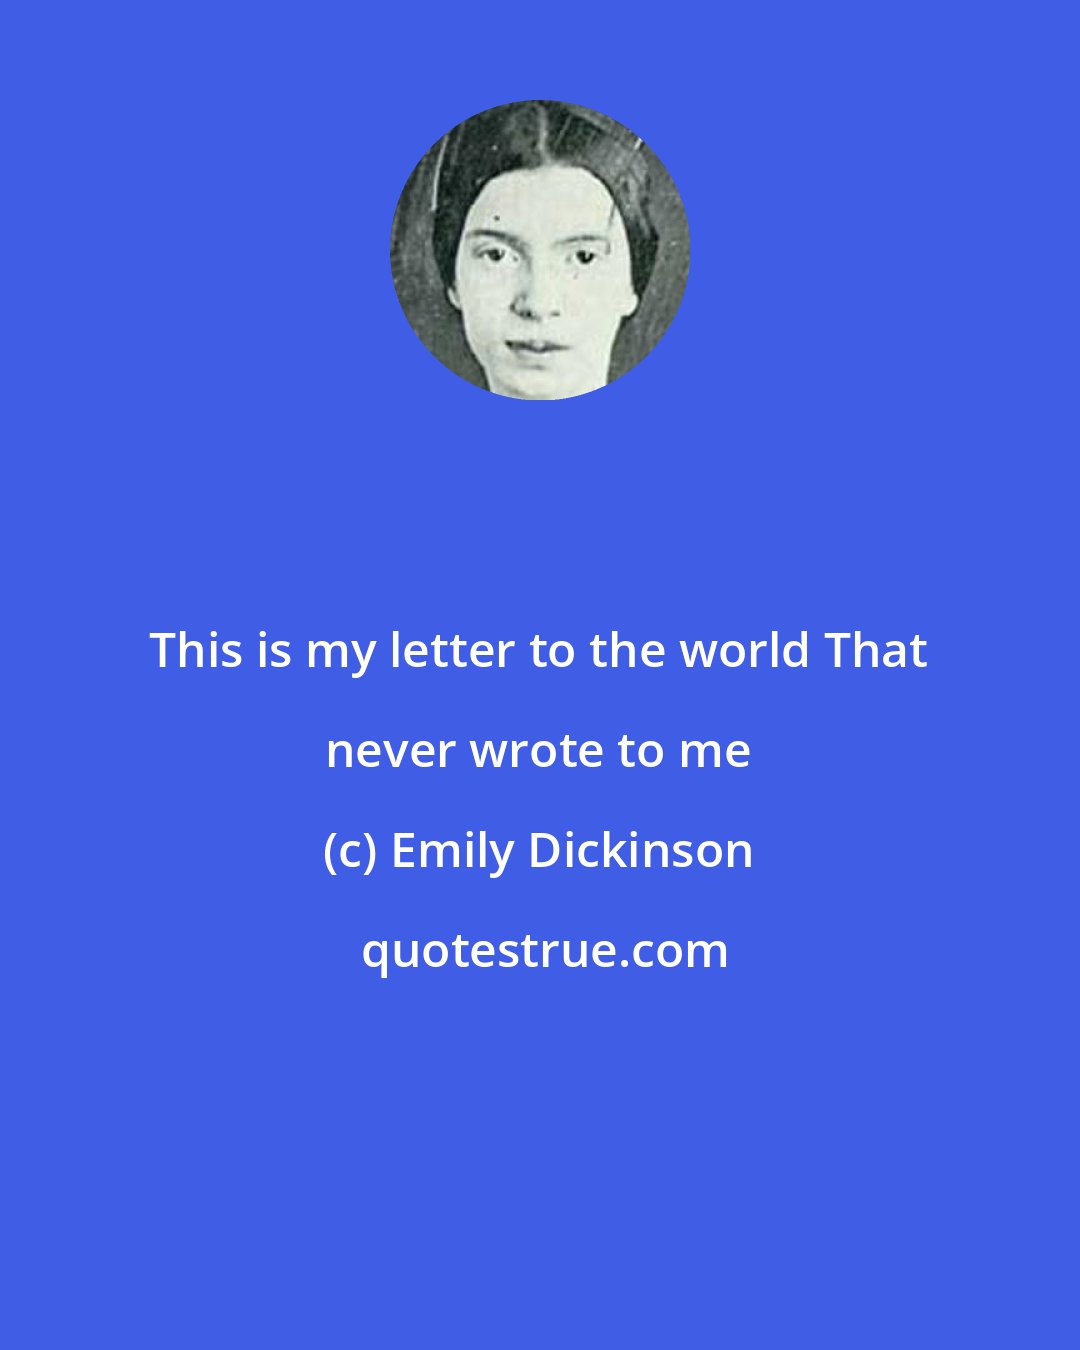 Emily Dickinson: This is my letter to the world That never wrote to me